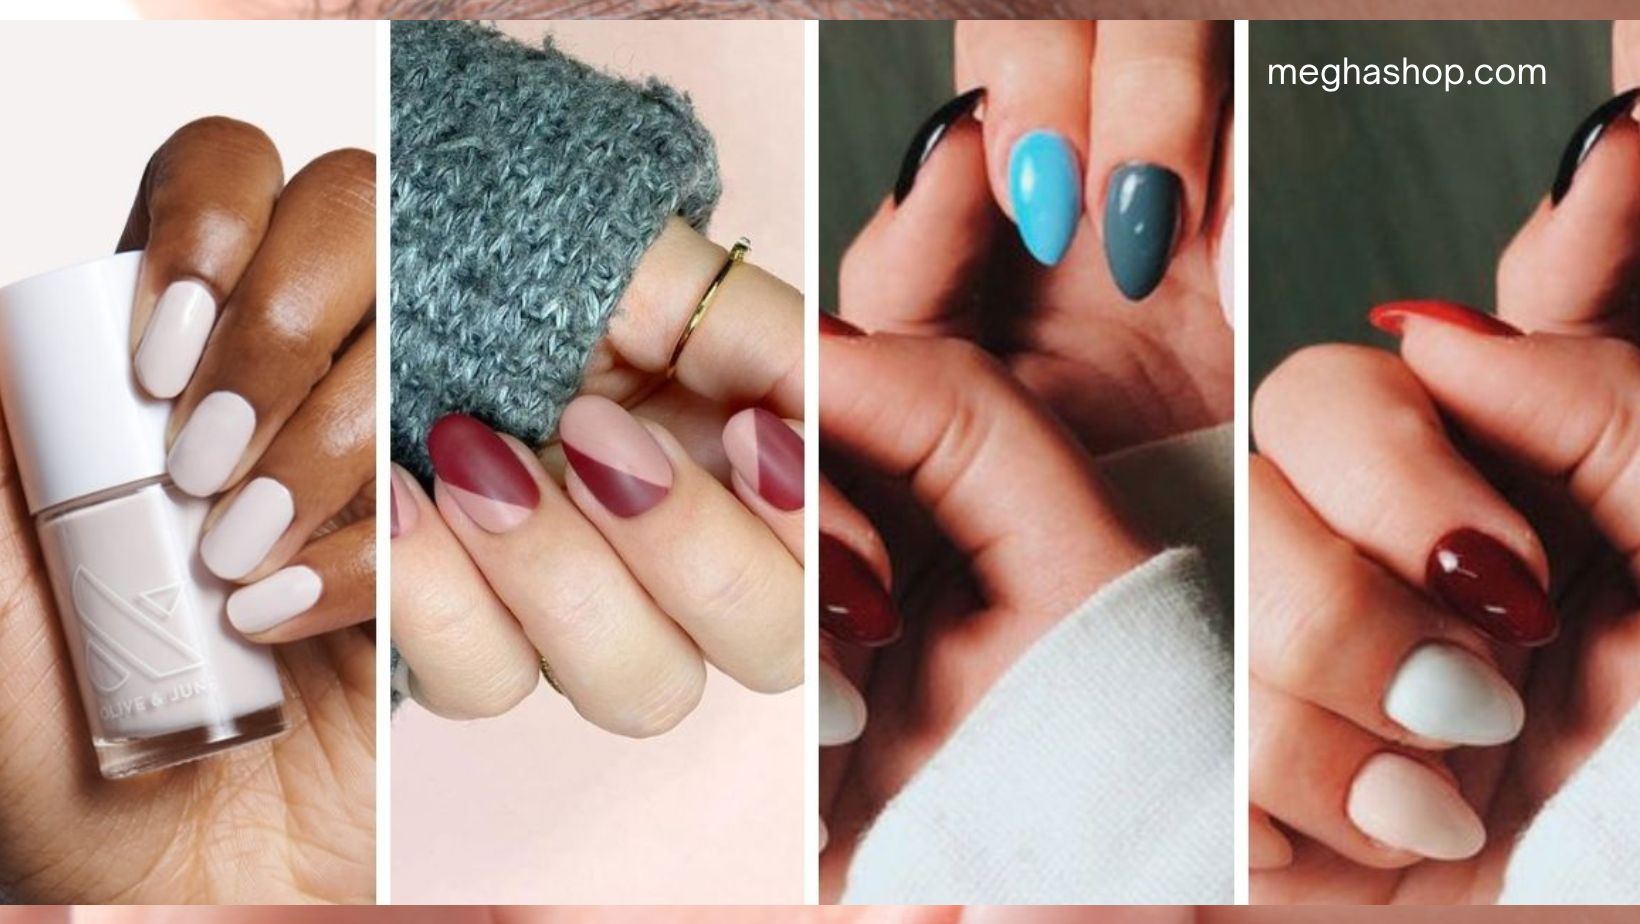 Thinking pink this season? Get inspired with these nail art designs